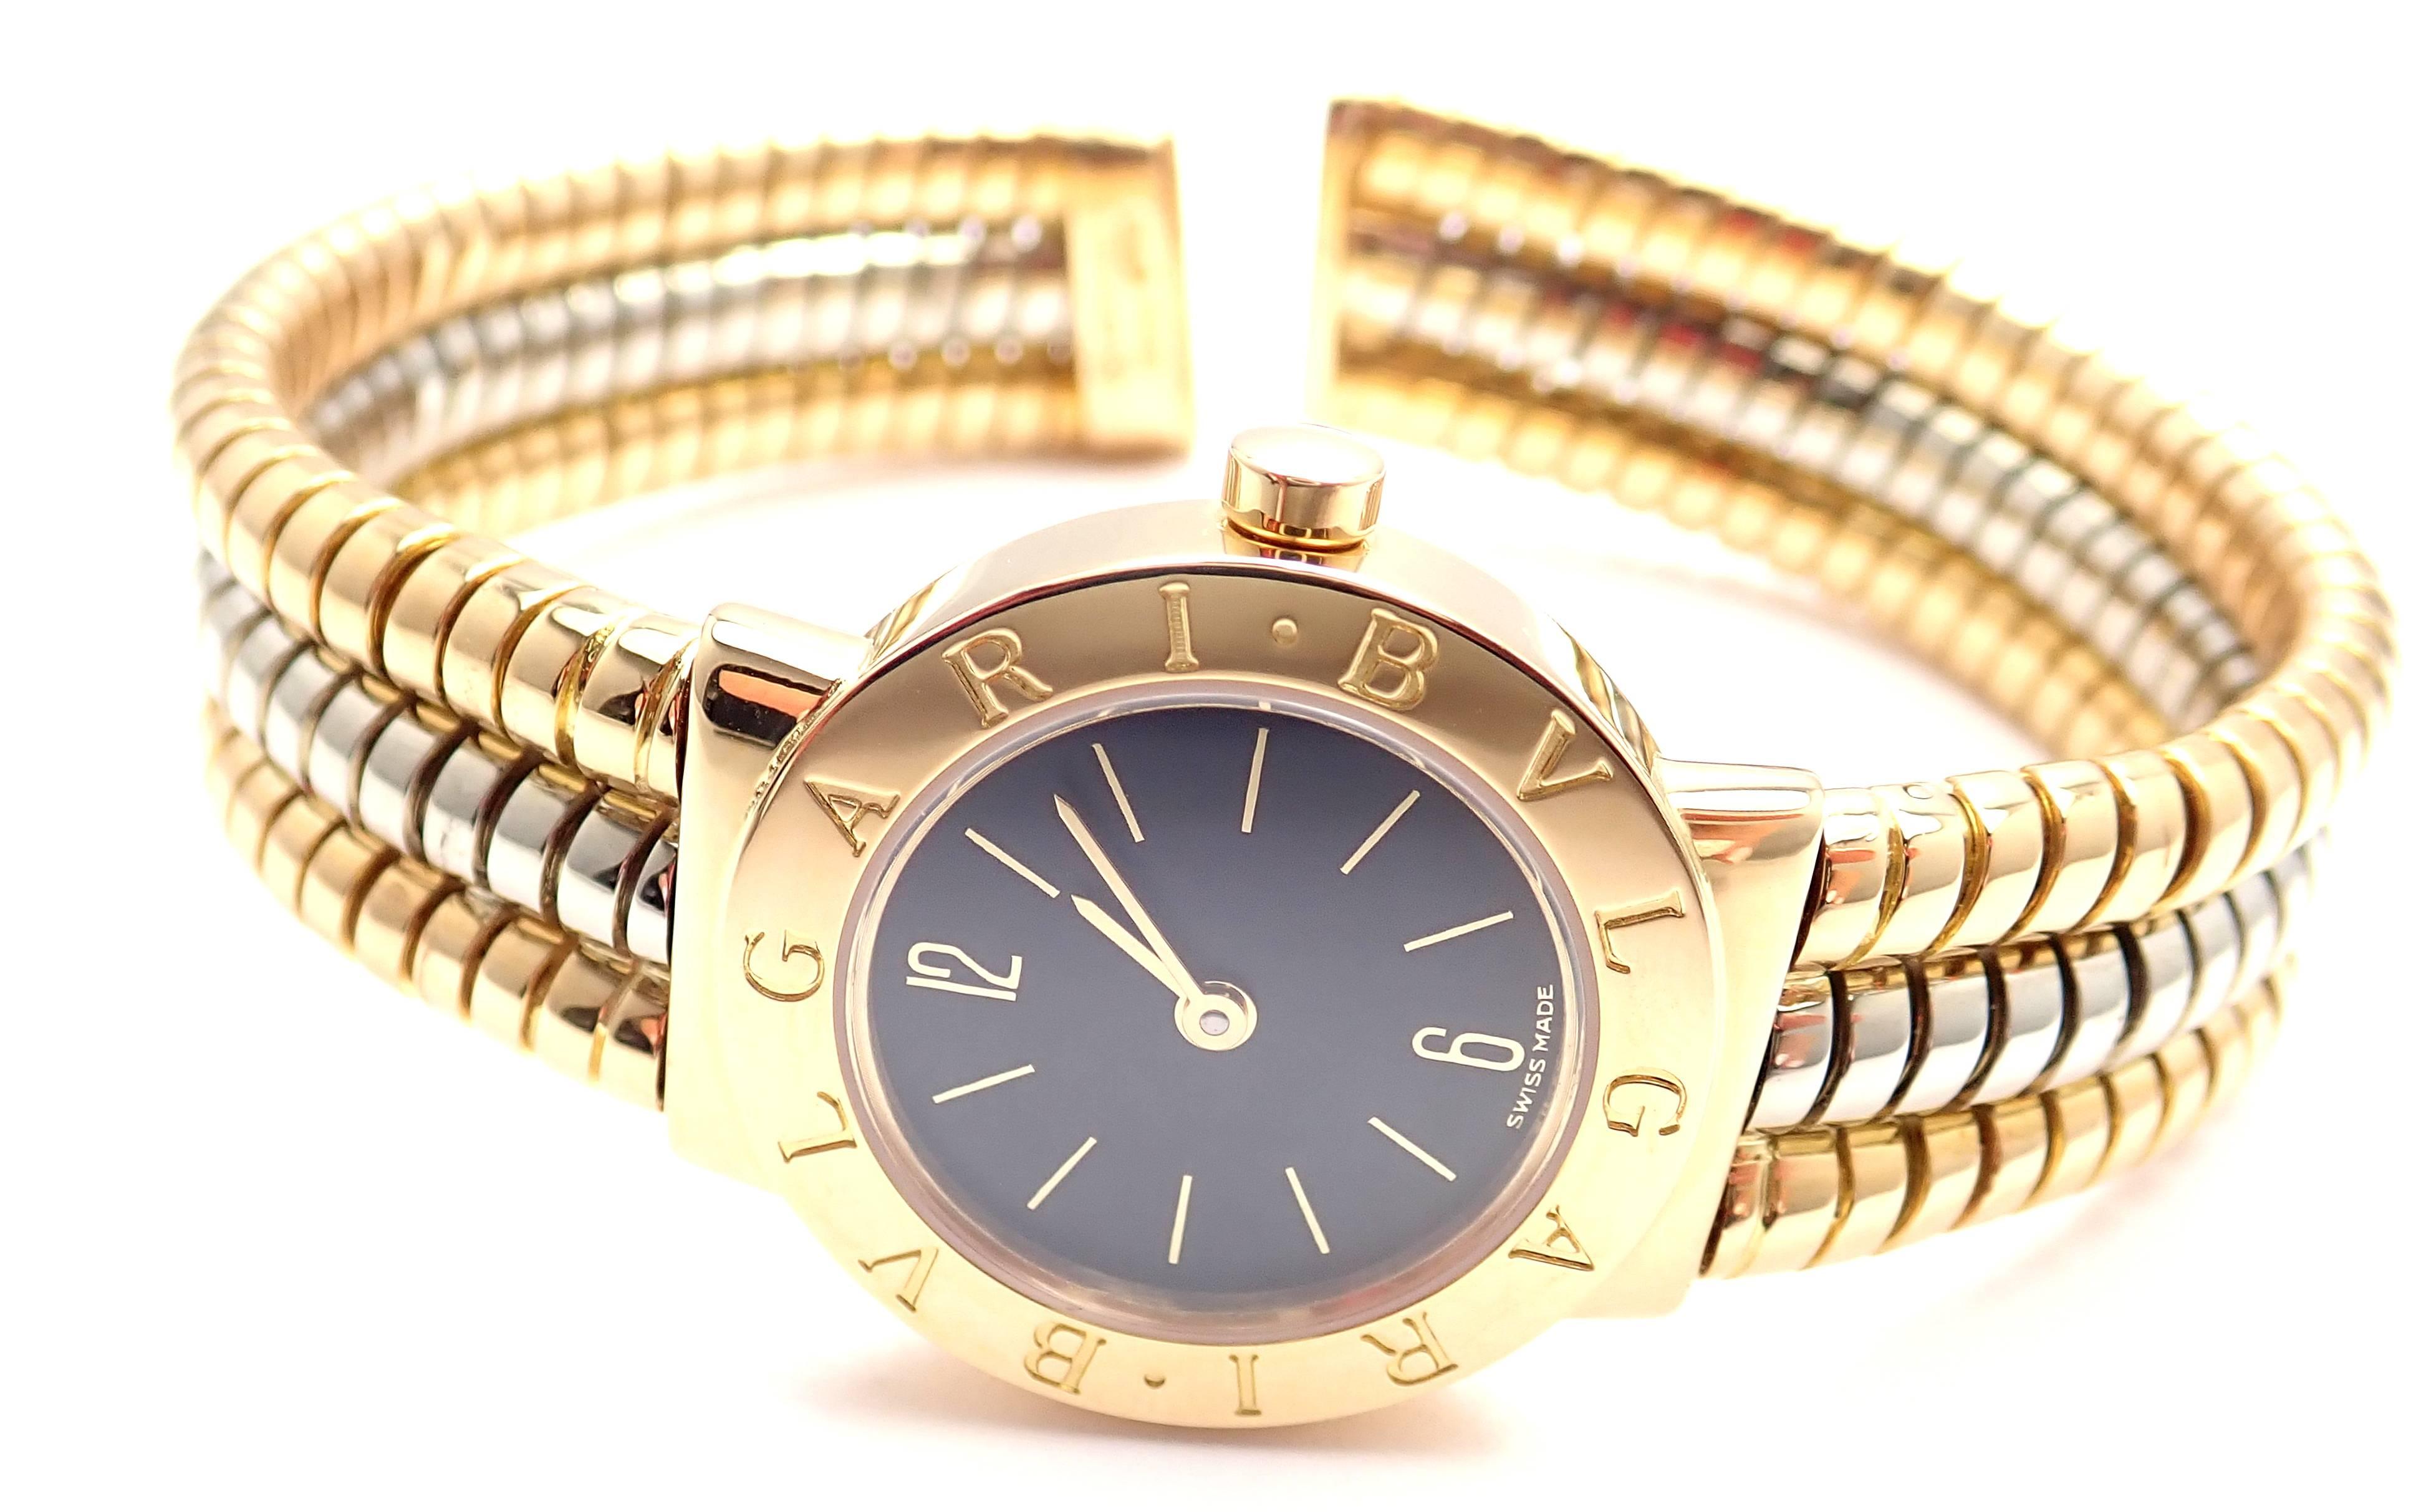 Bulgari lady's 18k multi color gold Tubogas Serpent Snake bracelet watch. 
Details:
Model: BB232T
Movement Type: Quartz
Case Size: case diameter: 23mm
Crystal: Anti-glare Sapphire
Wrist Size: 7 inches, this design is flexible so it will fit most